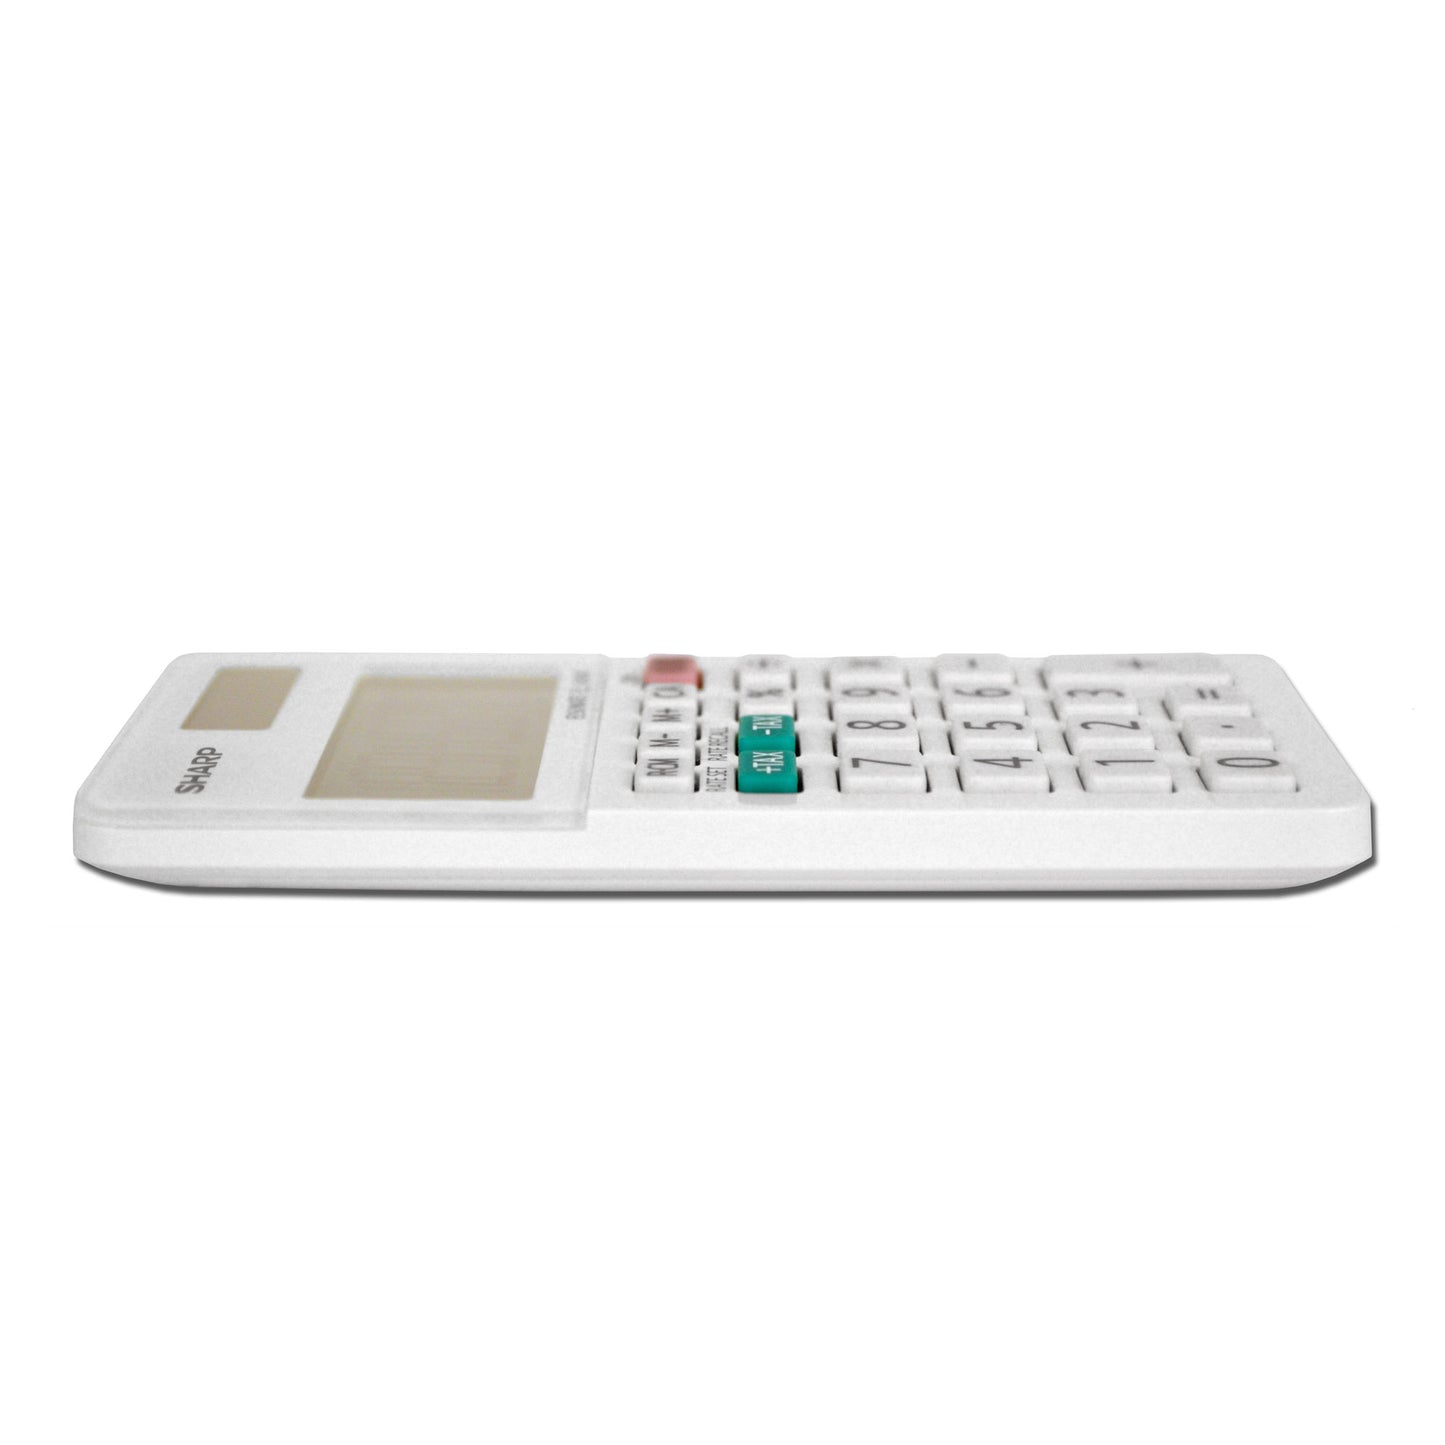 side view of white pocket calculator